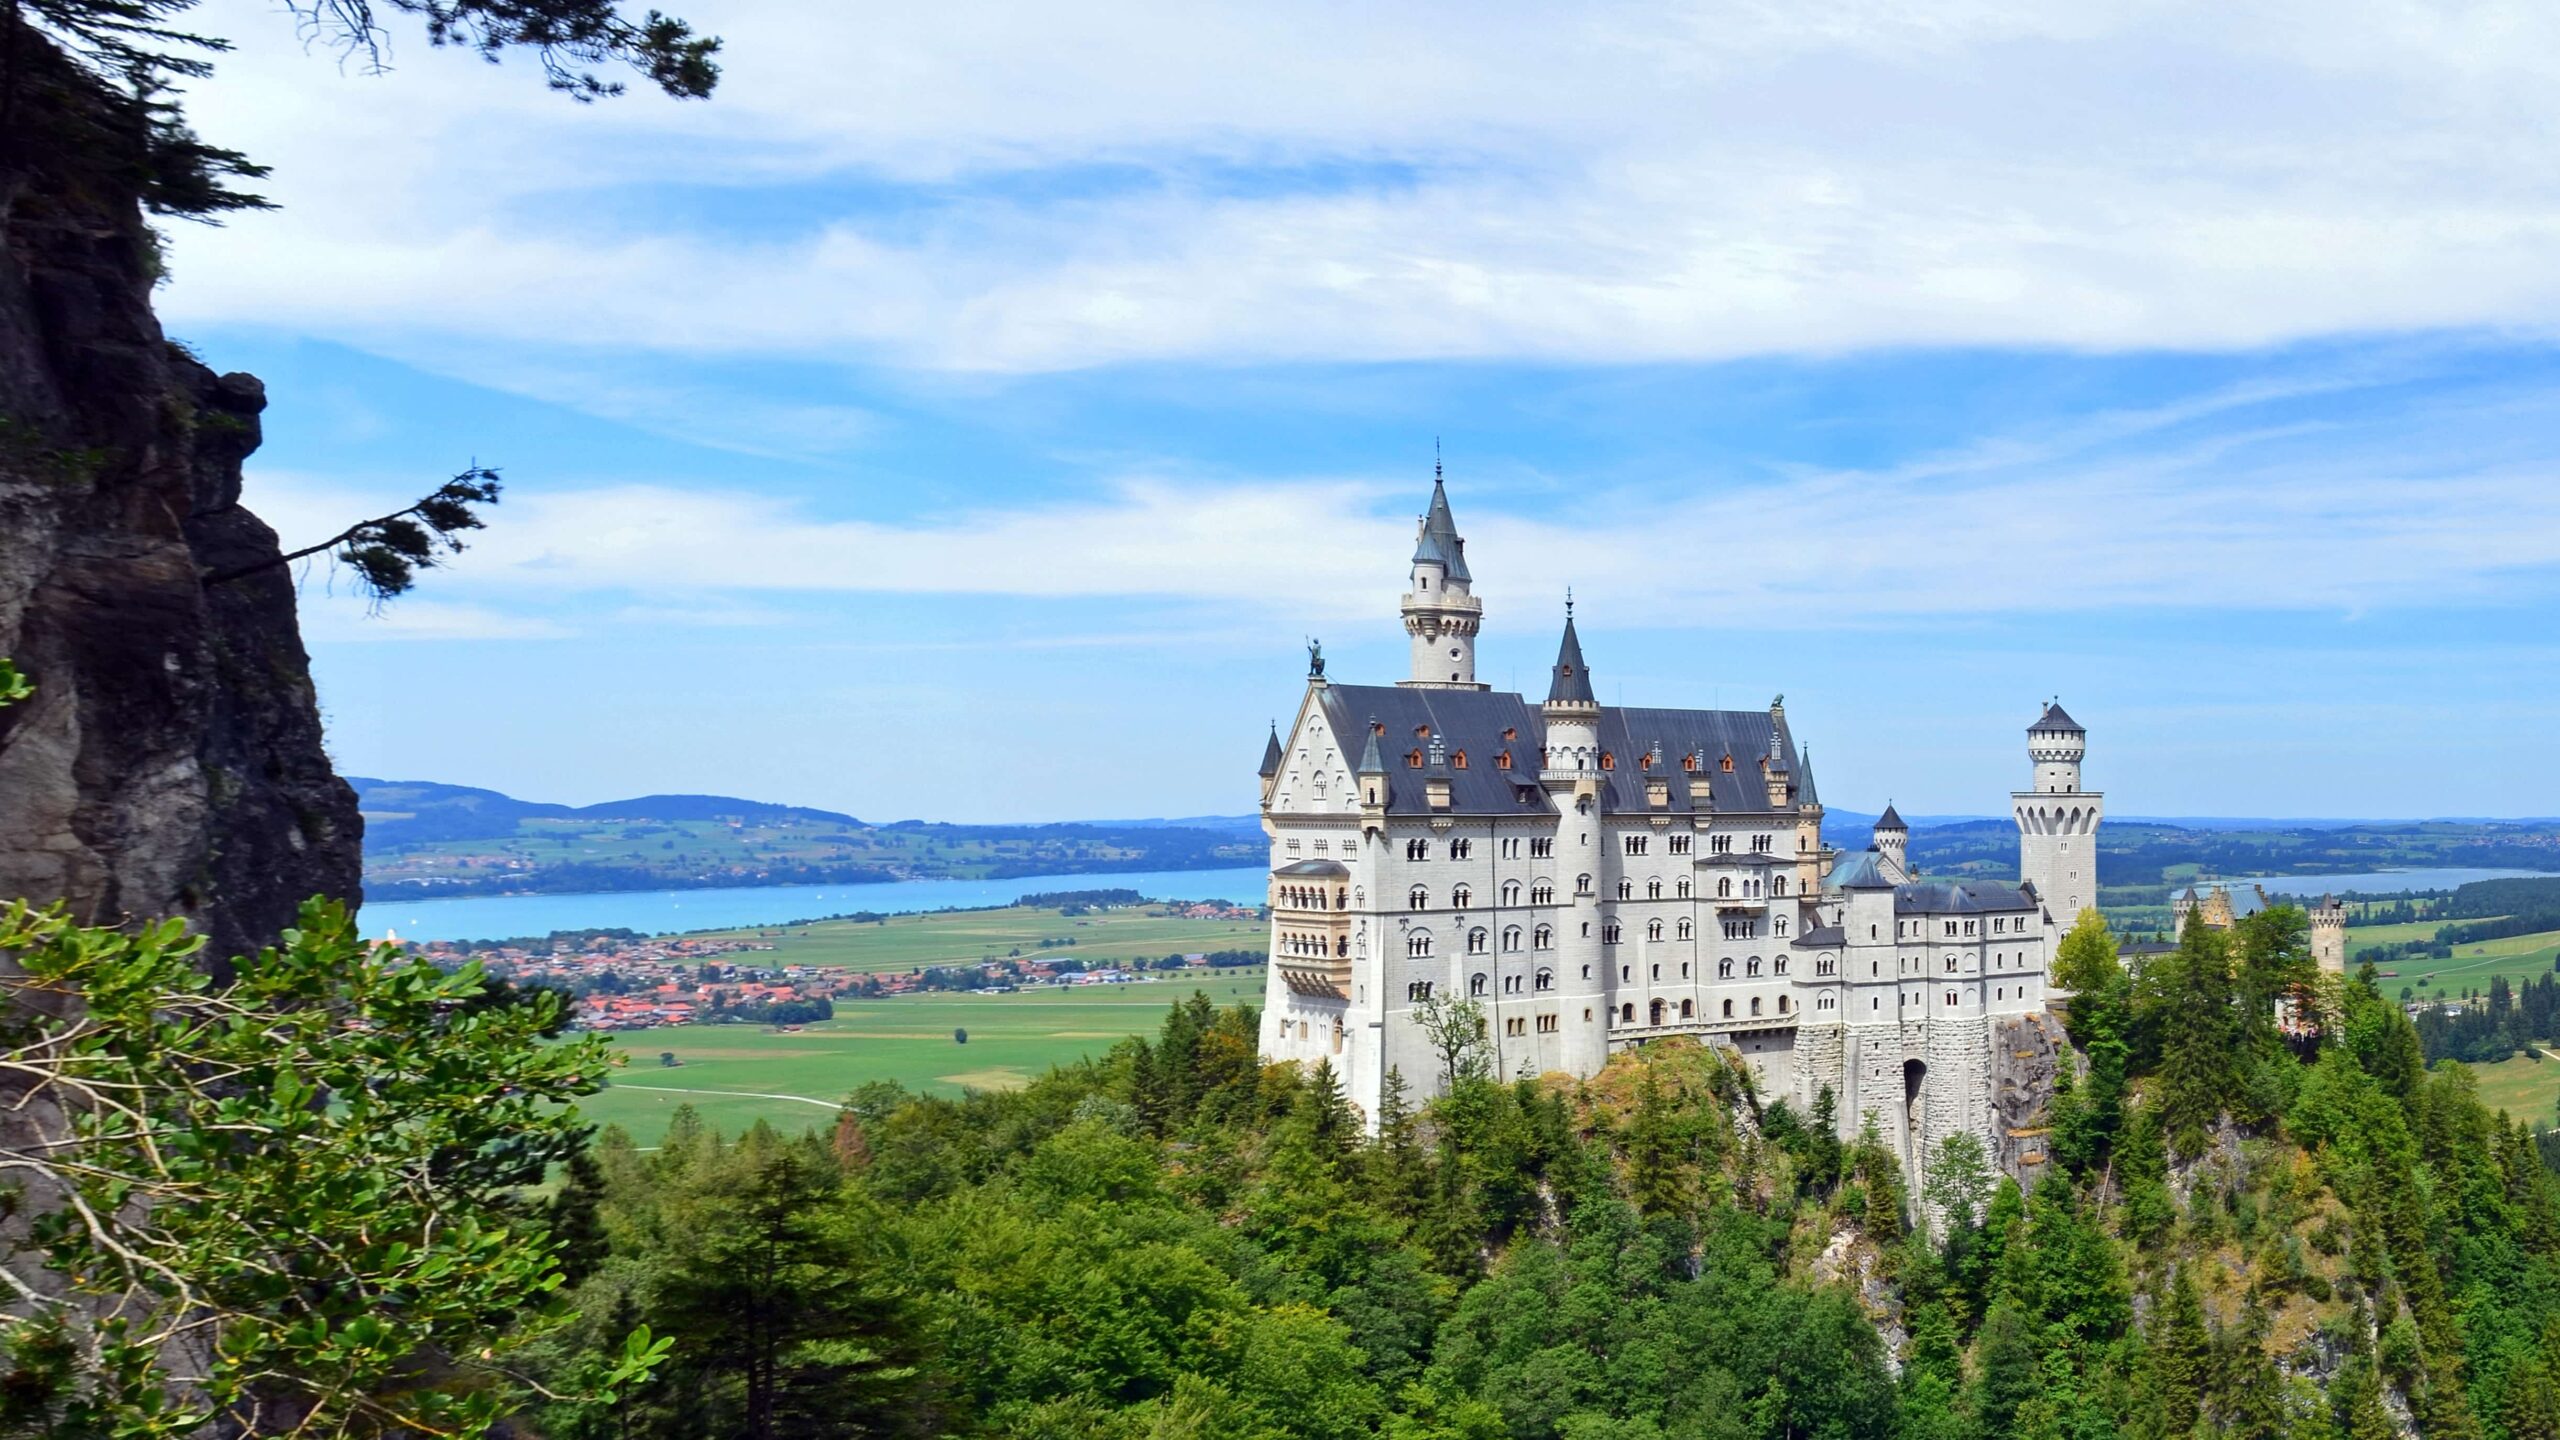 Want to see Palaces? Visit Germany.